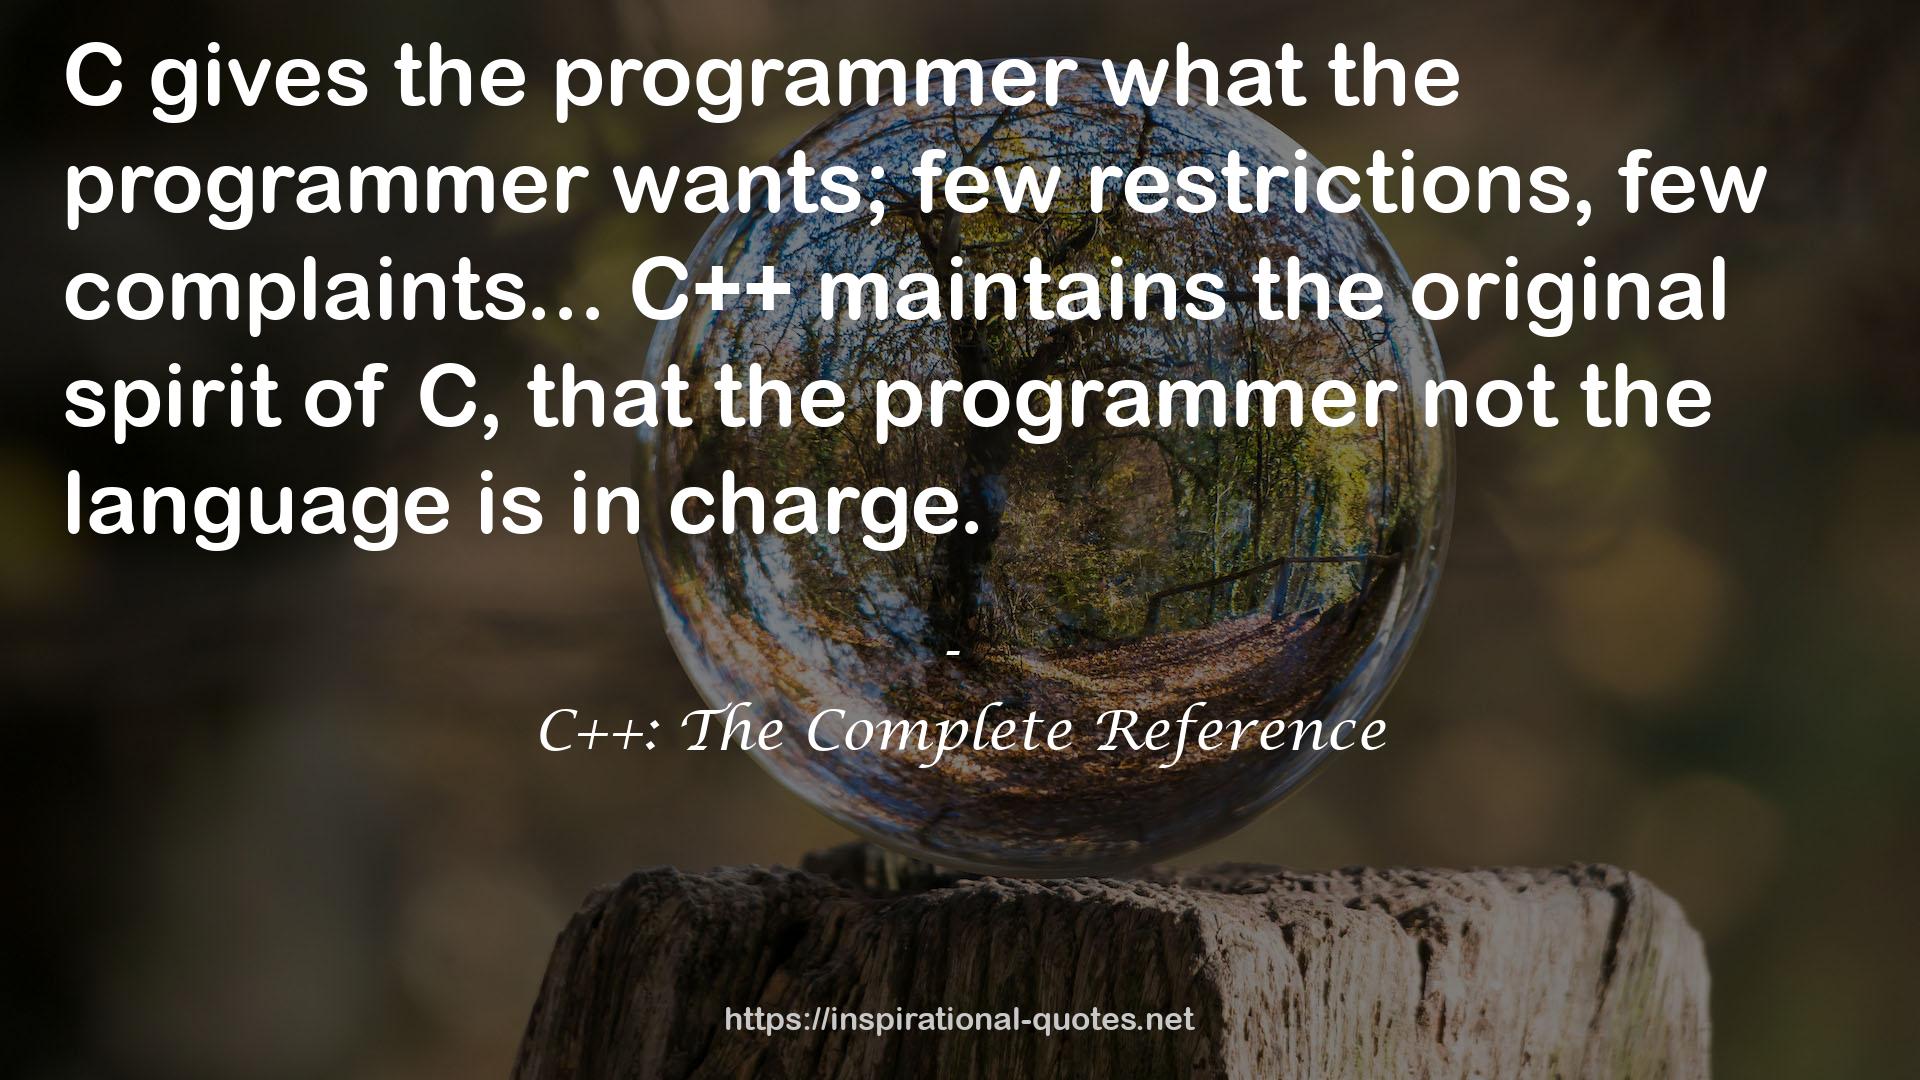 C++: The Complete Reference QUOTES